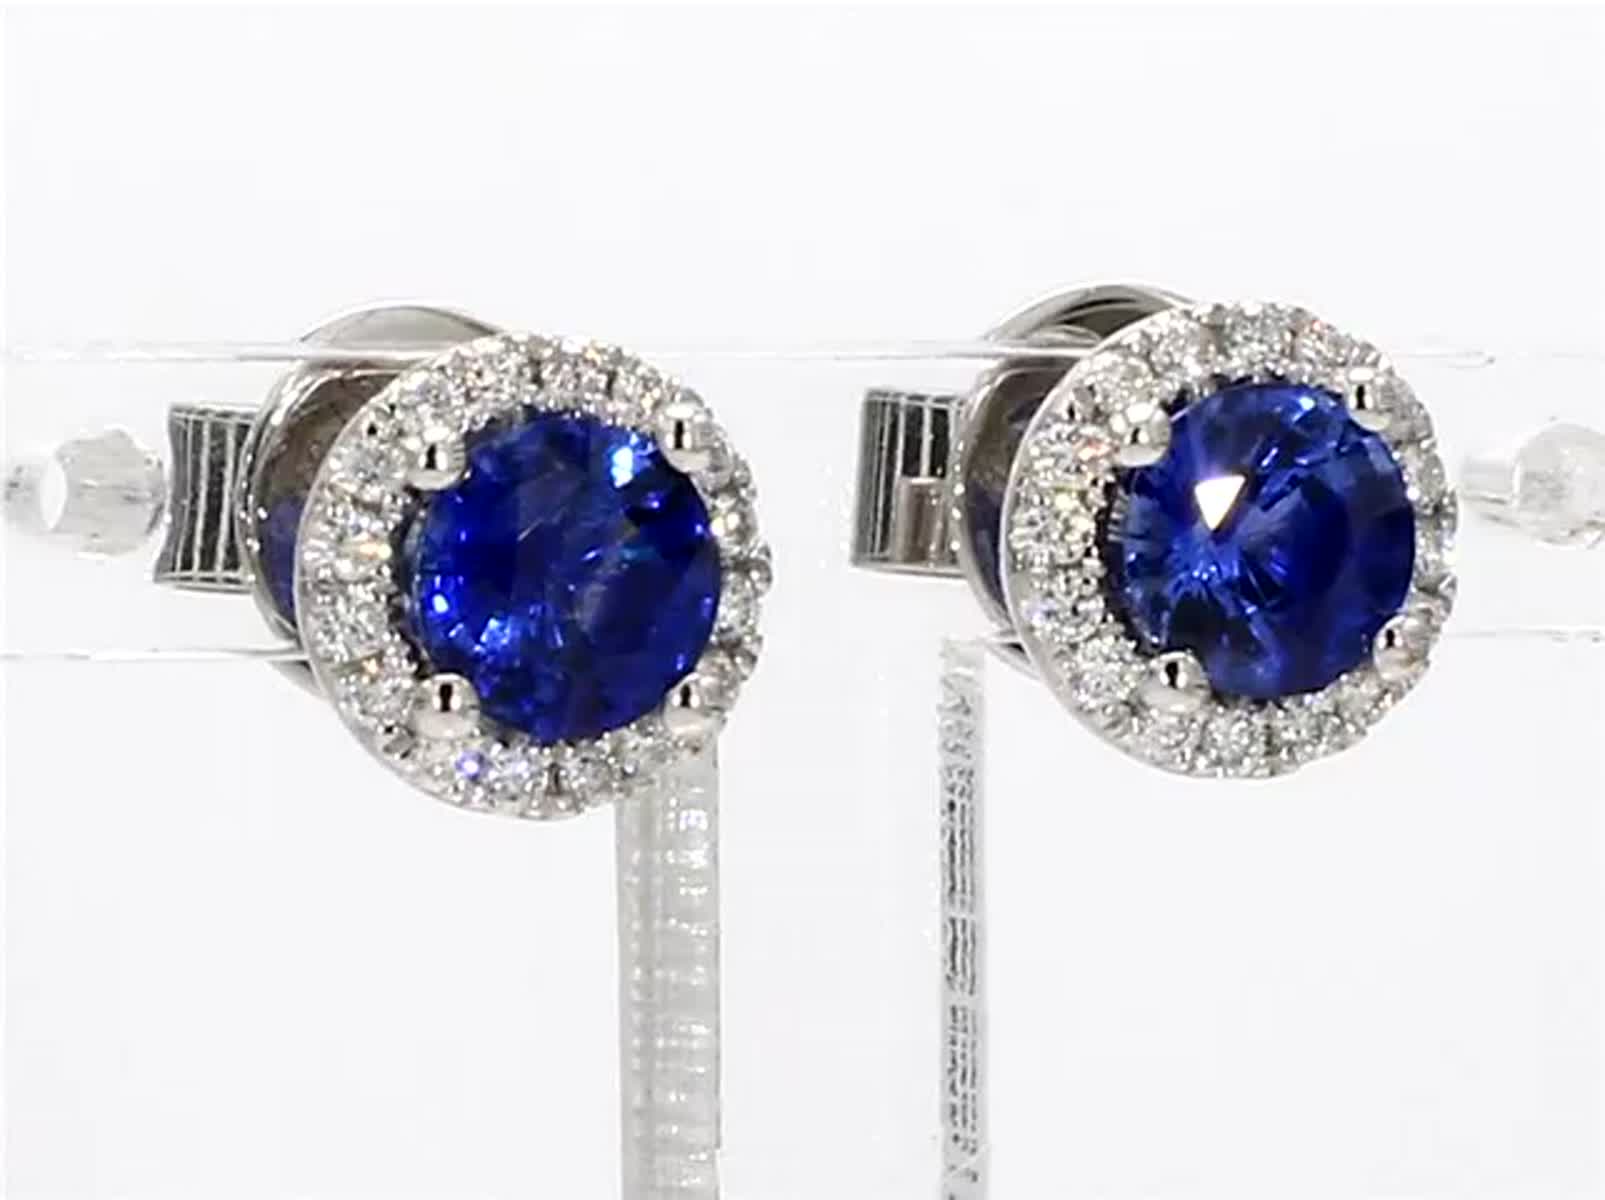 Natural Blue Round Sapphire and White Diamond 1.39 Carat TW Gold Stud Earrings